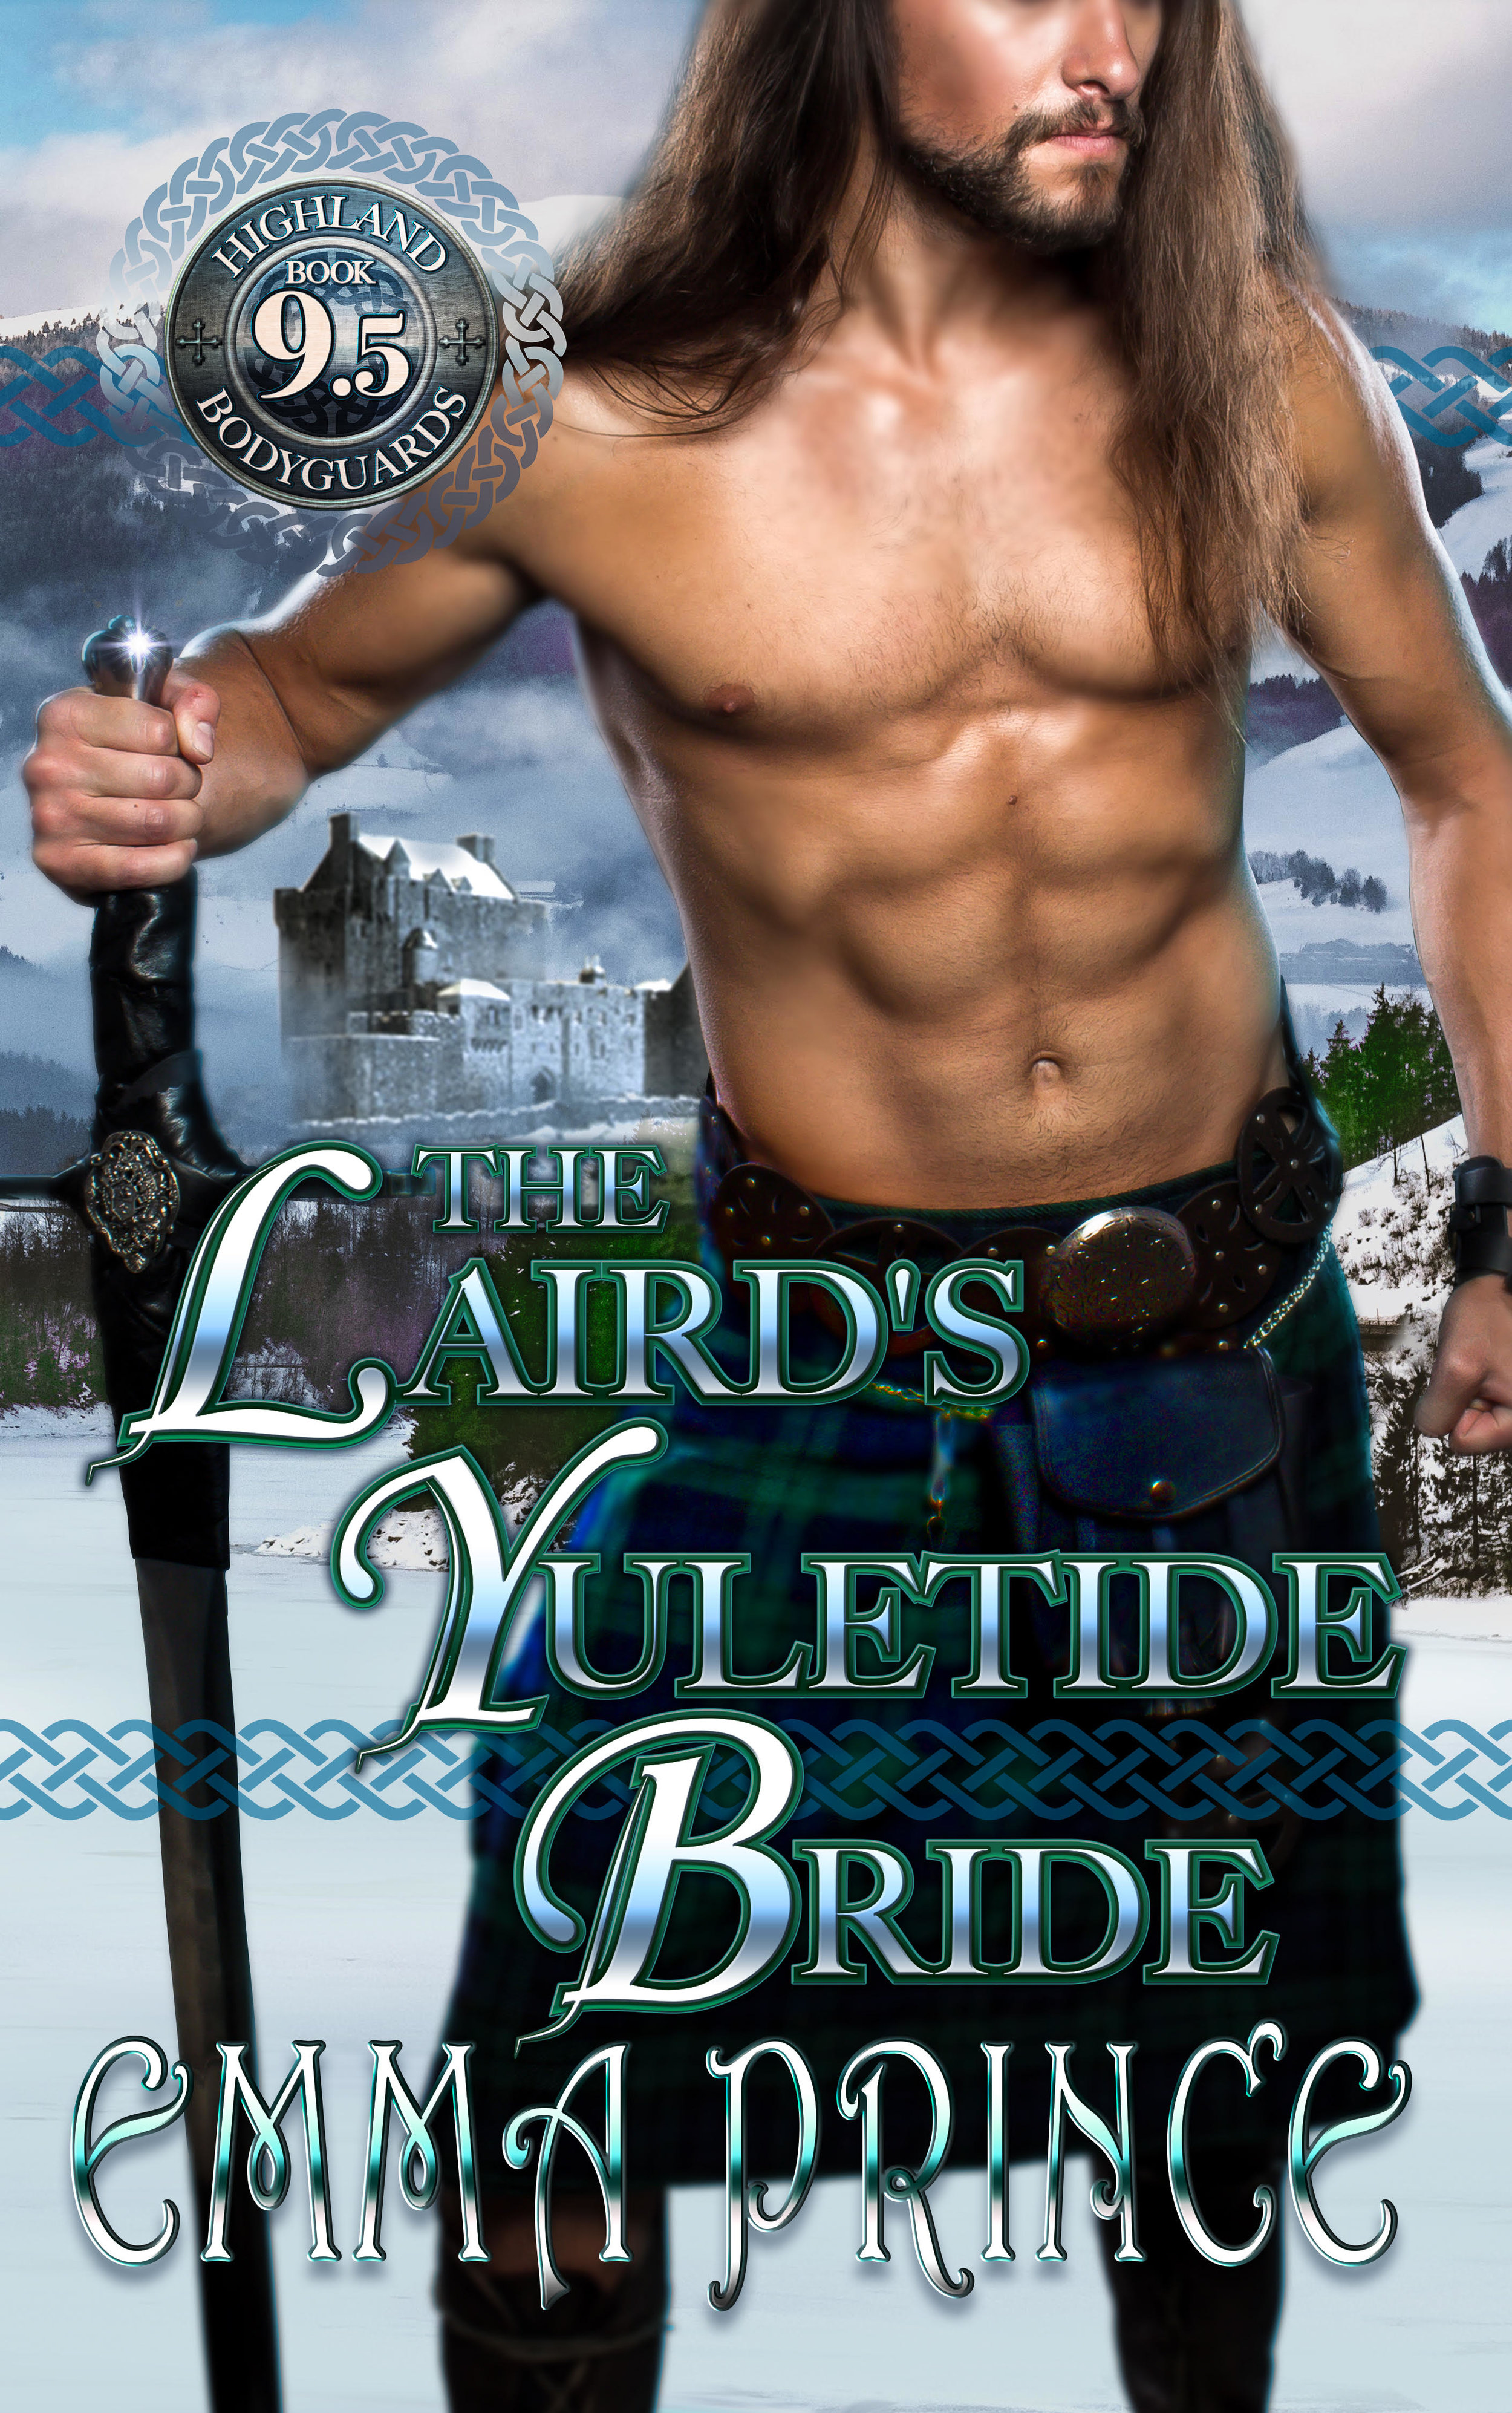 The Laird's Yuletide Bride (Book 9.5)